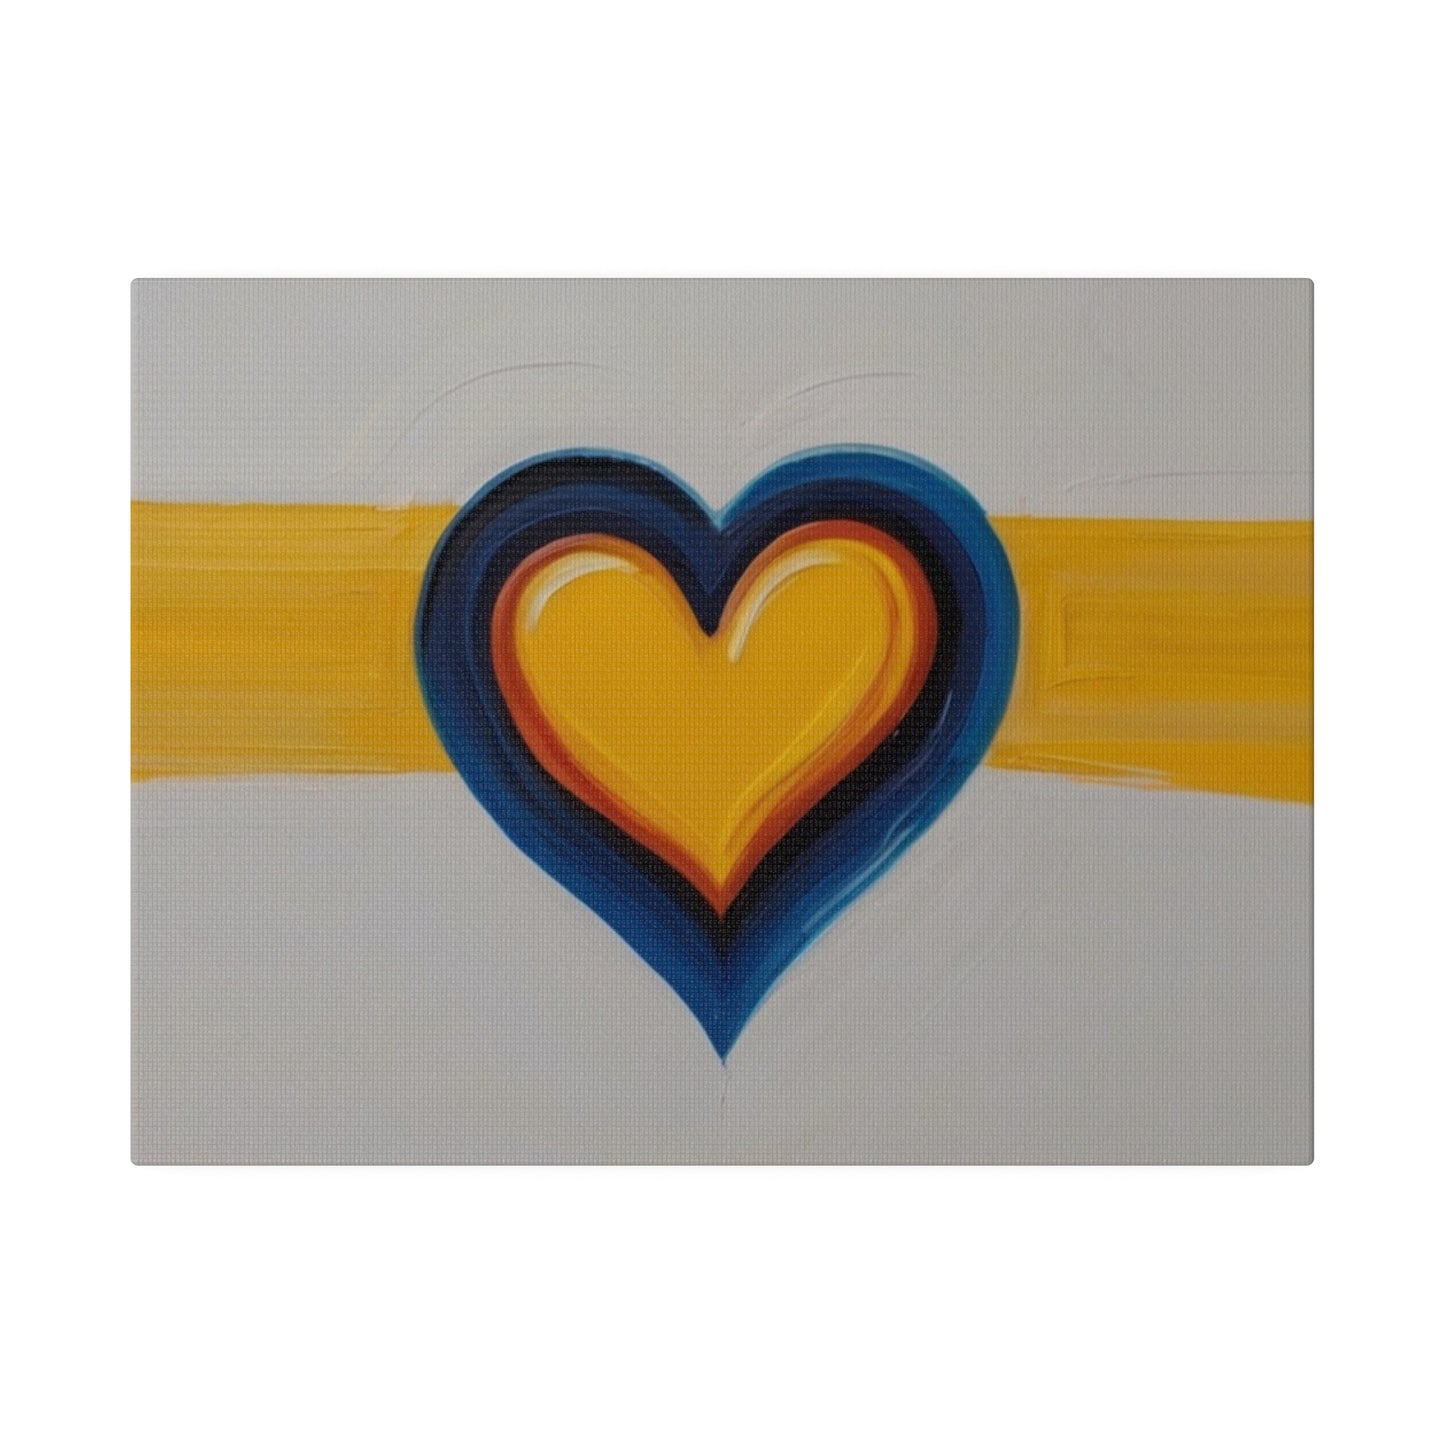 Yellow Stripe Love Heart - Matte Canvas, Stretched, 0.75"